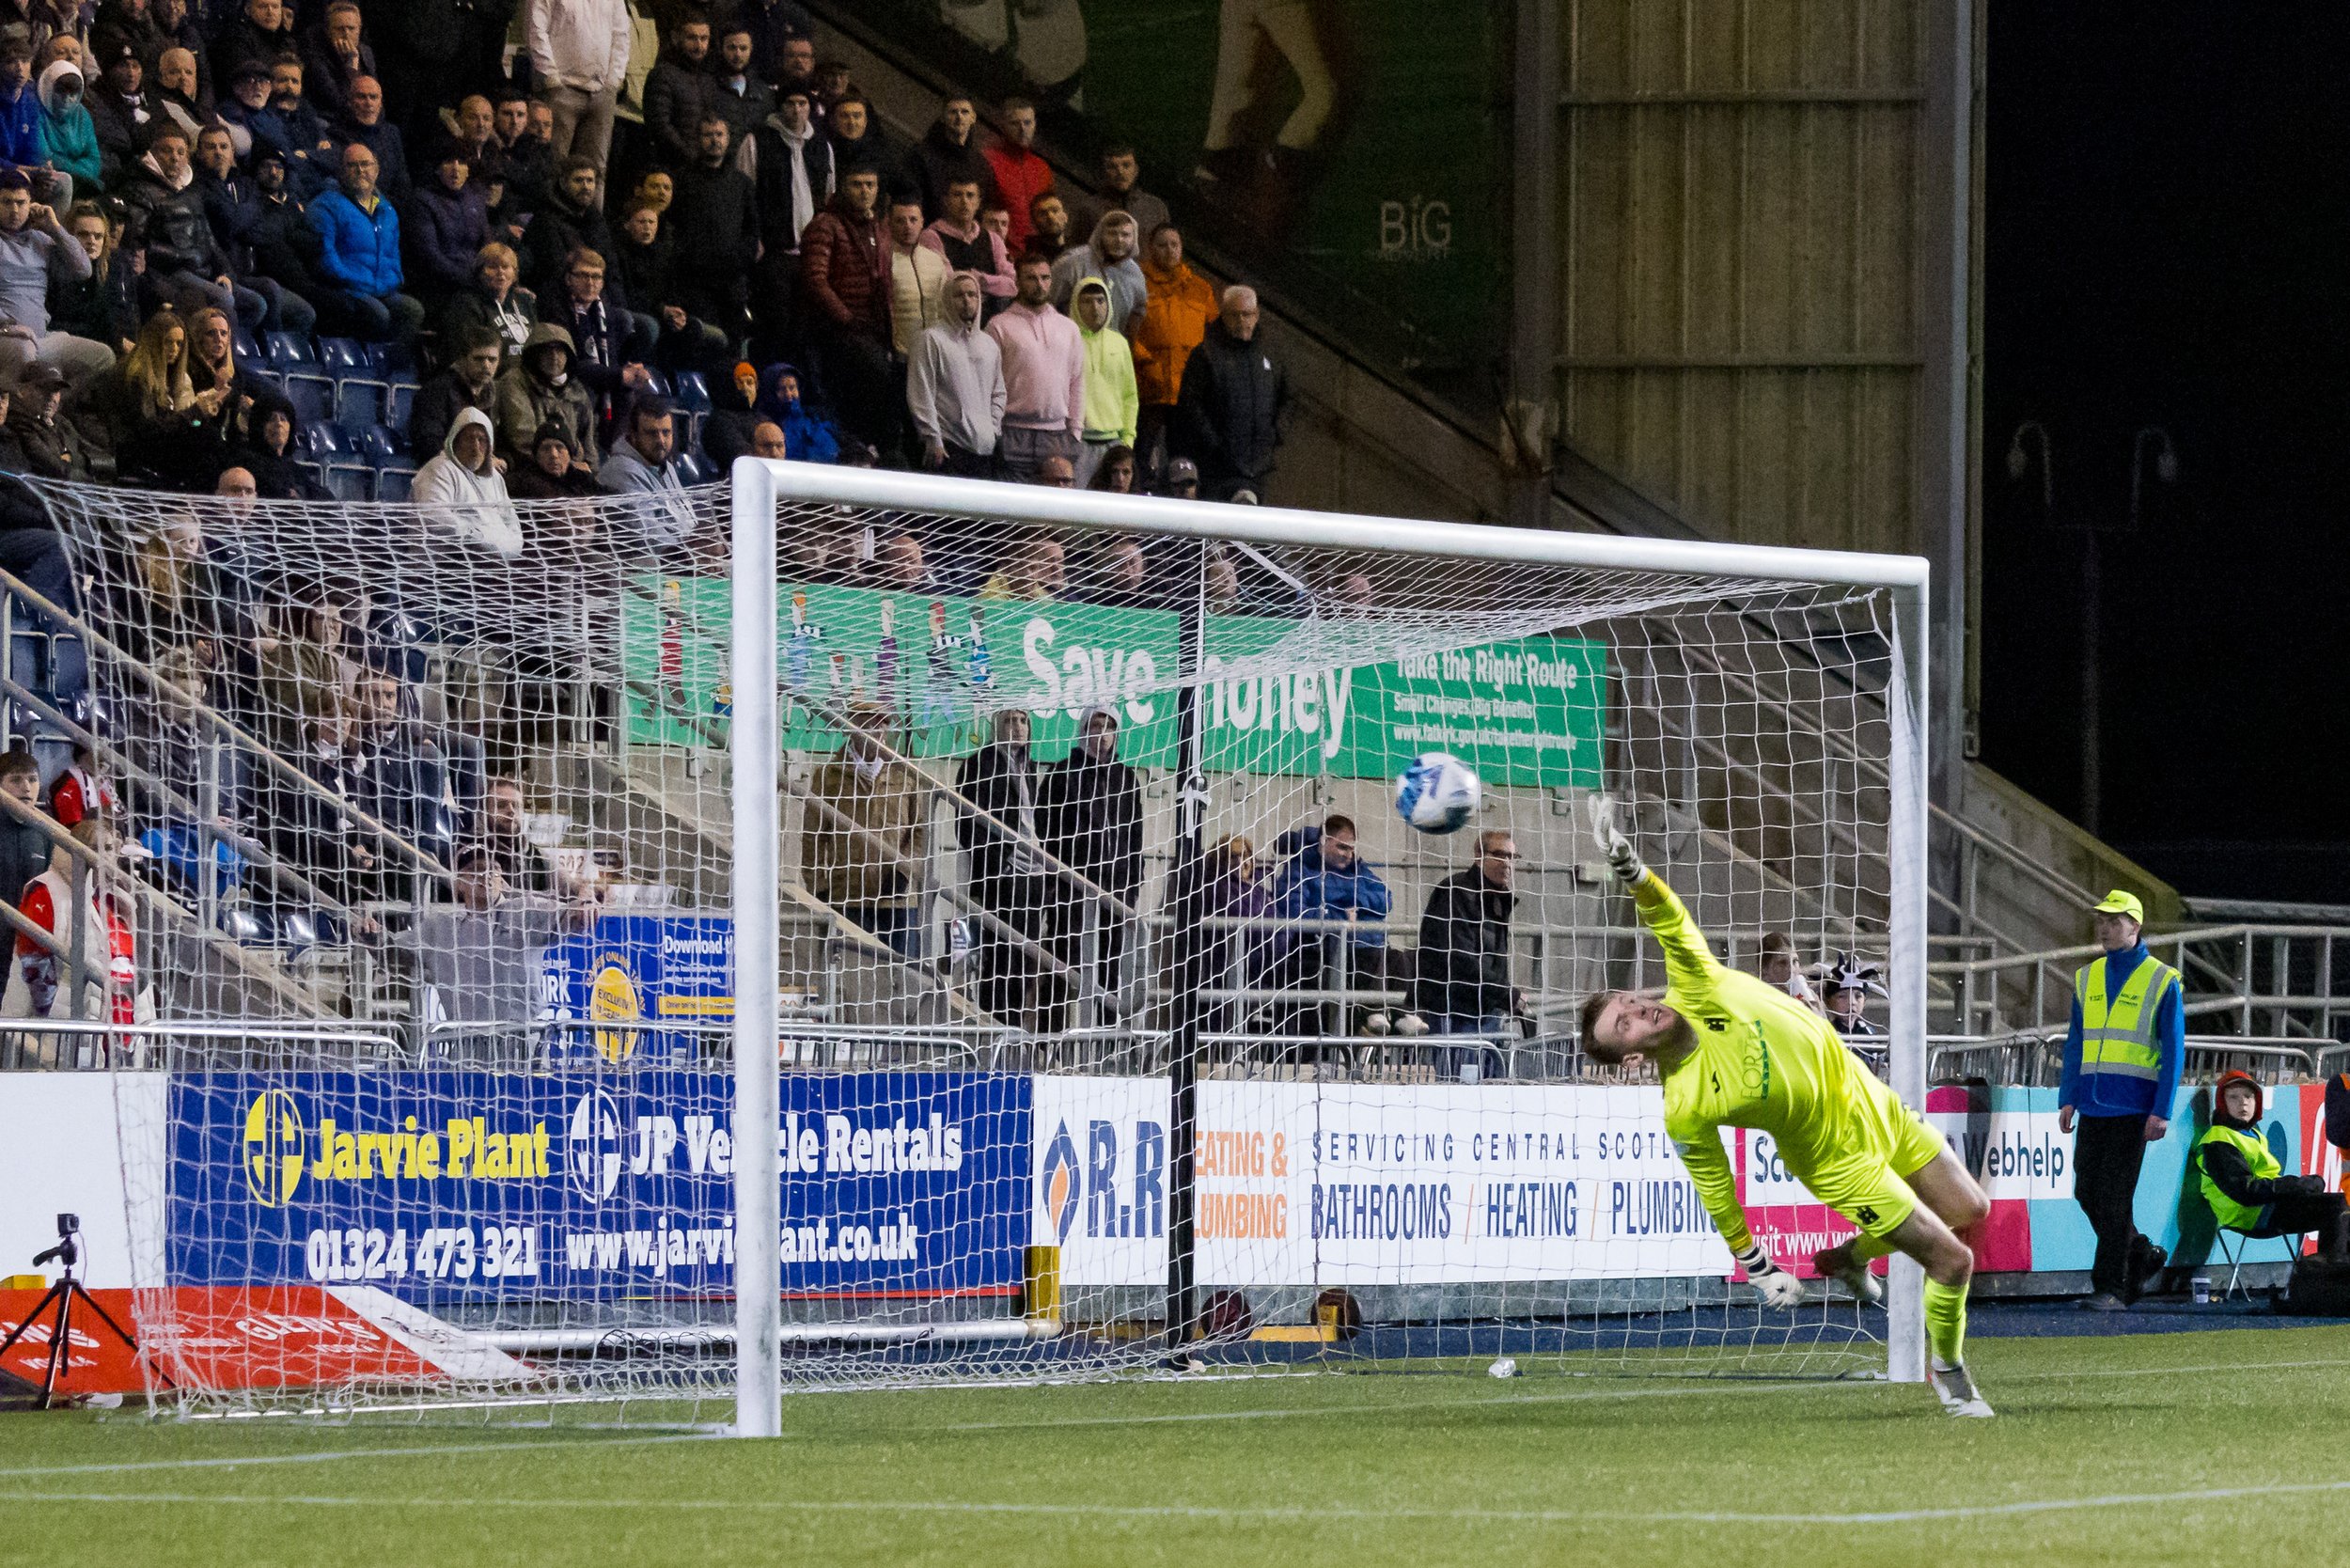  Falkirk scores Vs FC Edinburgh as their goalkeeper dives to save the ball unsuccessfully  